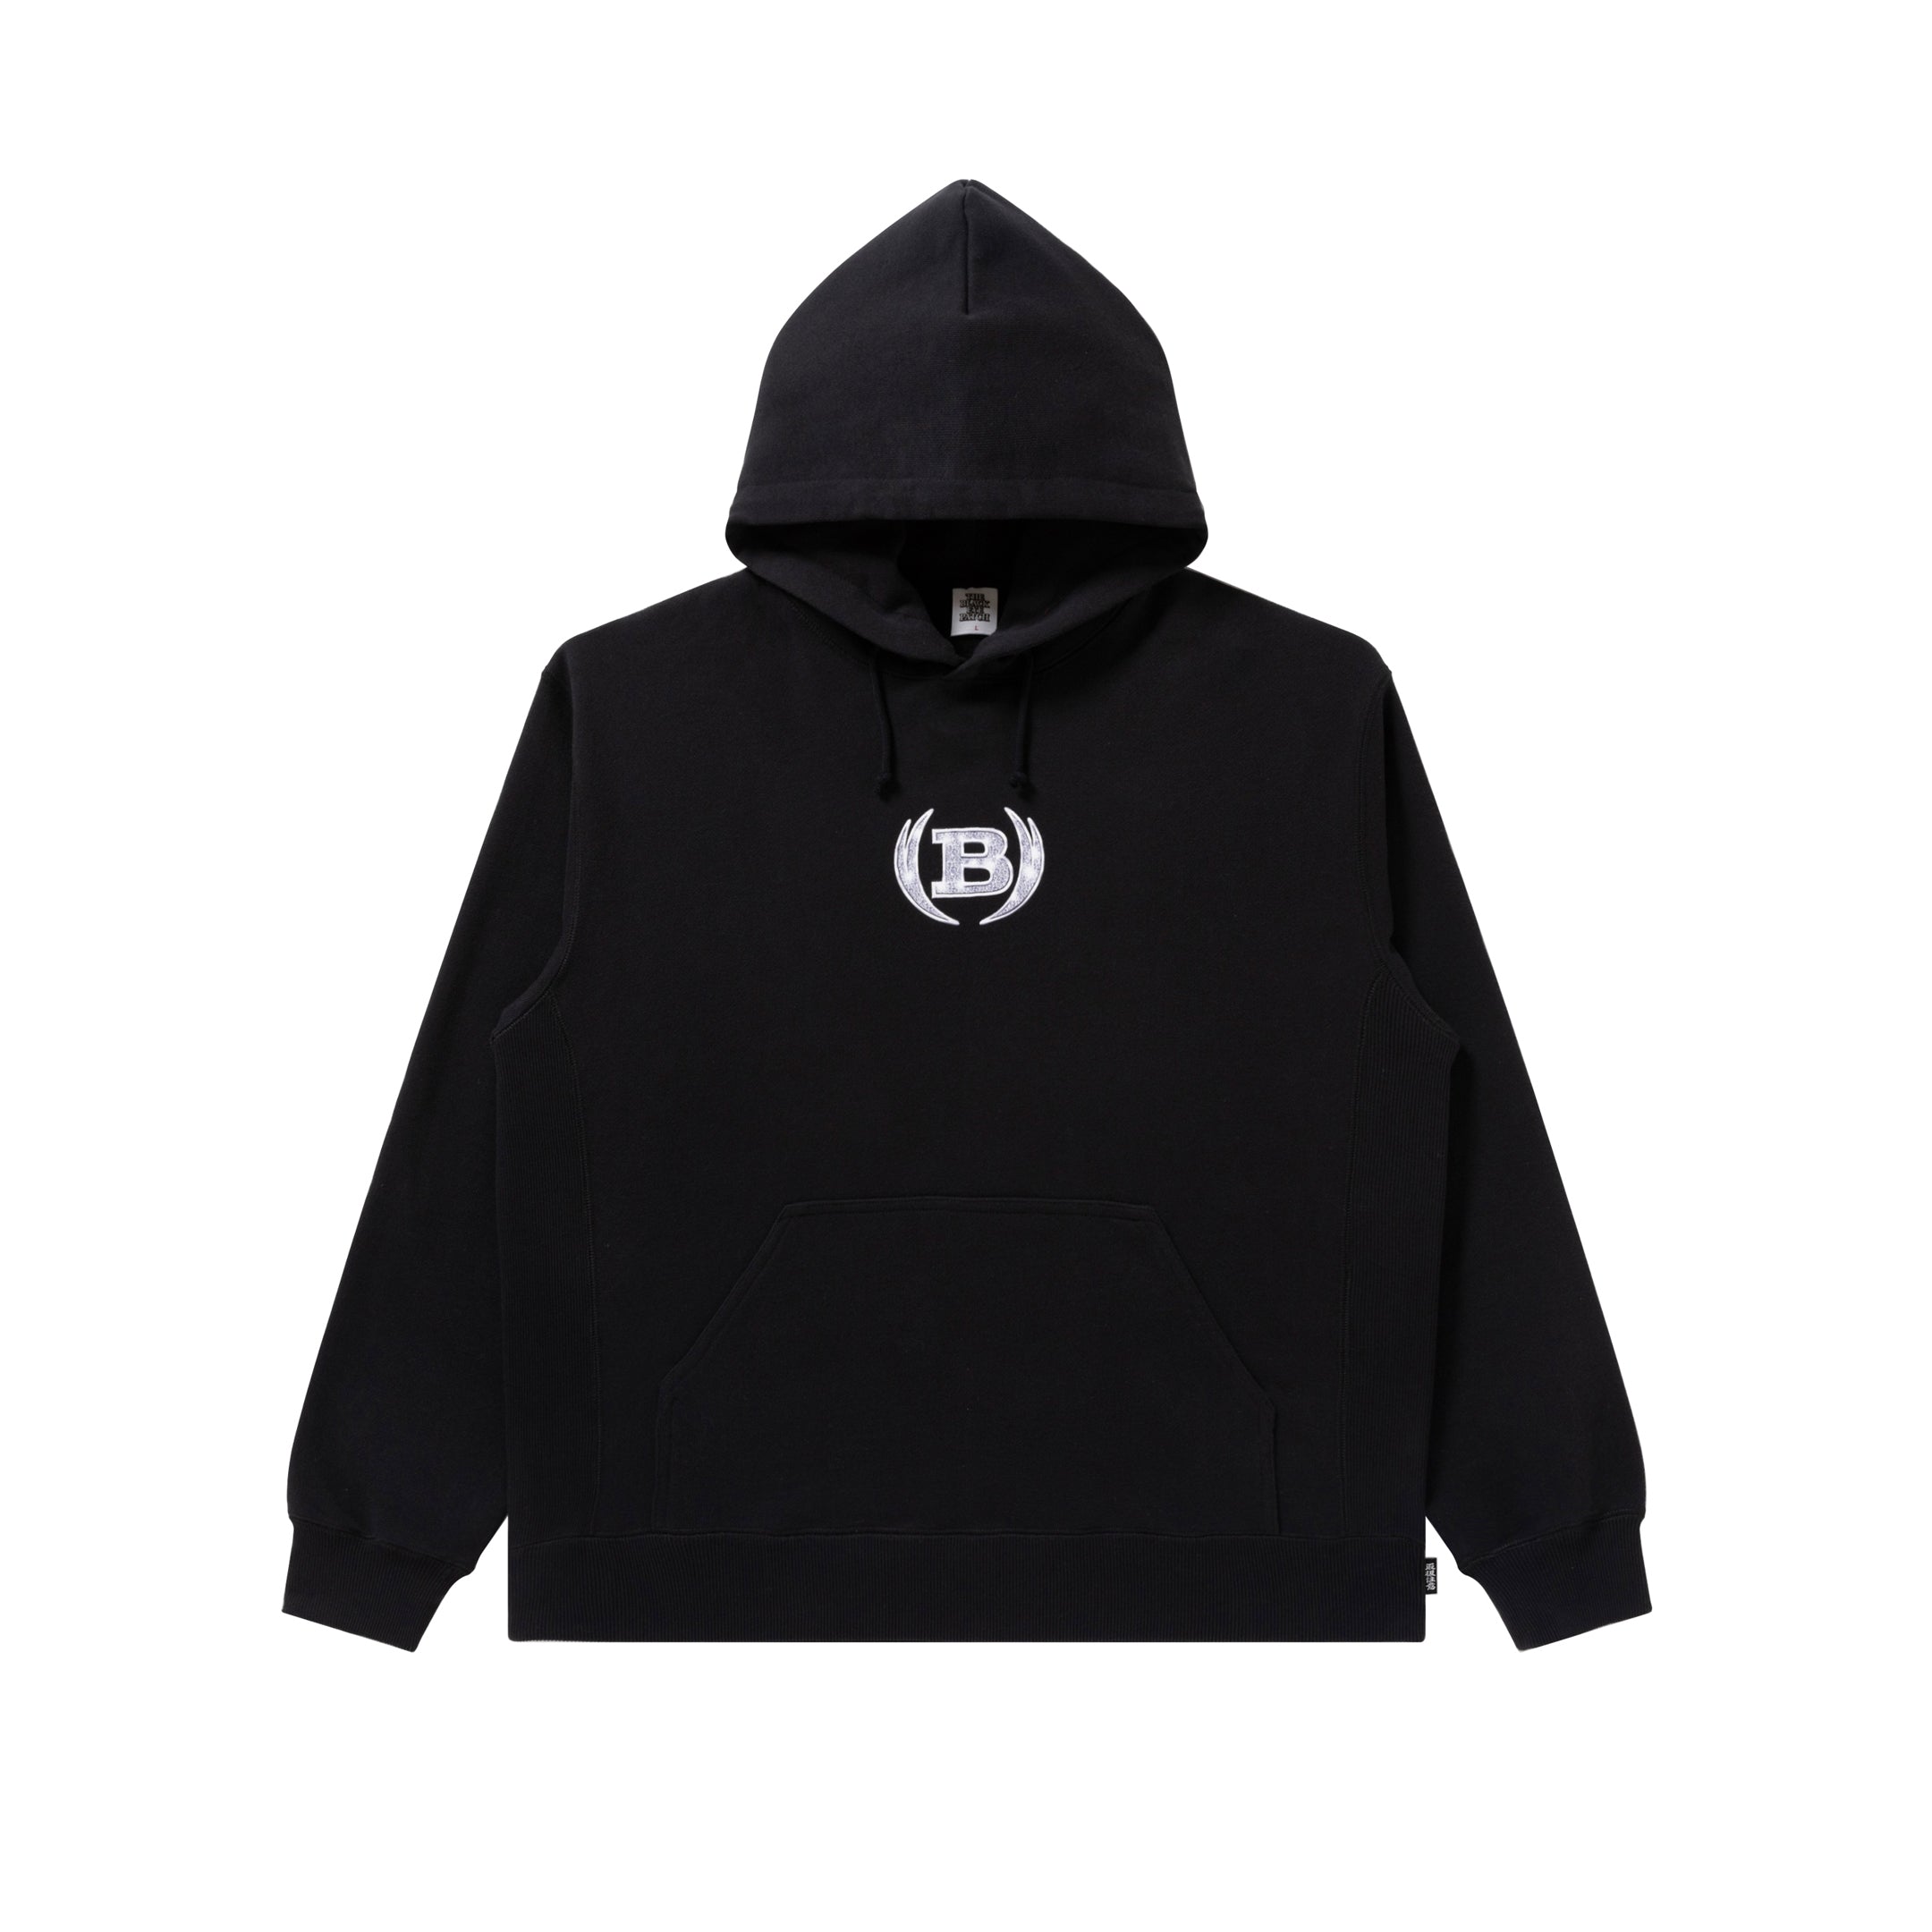 ICED OUT WINGED LOGO HOODIE BLACK